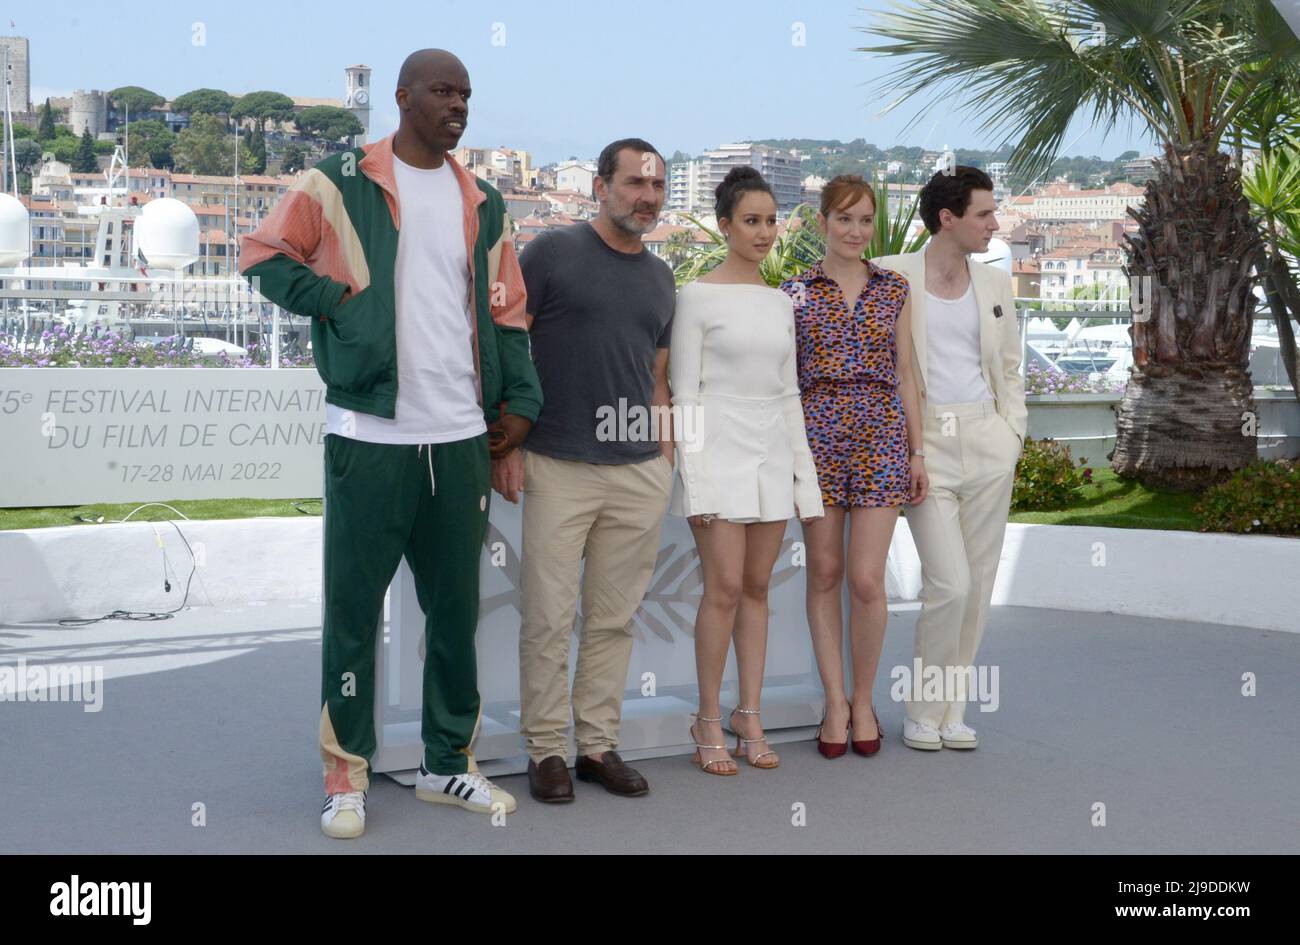 Jean Pascal Lacoste High Resolution Stock Photography and Images - Alamy